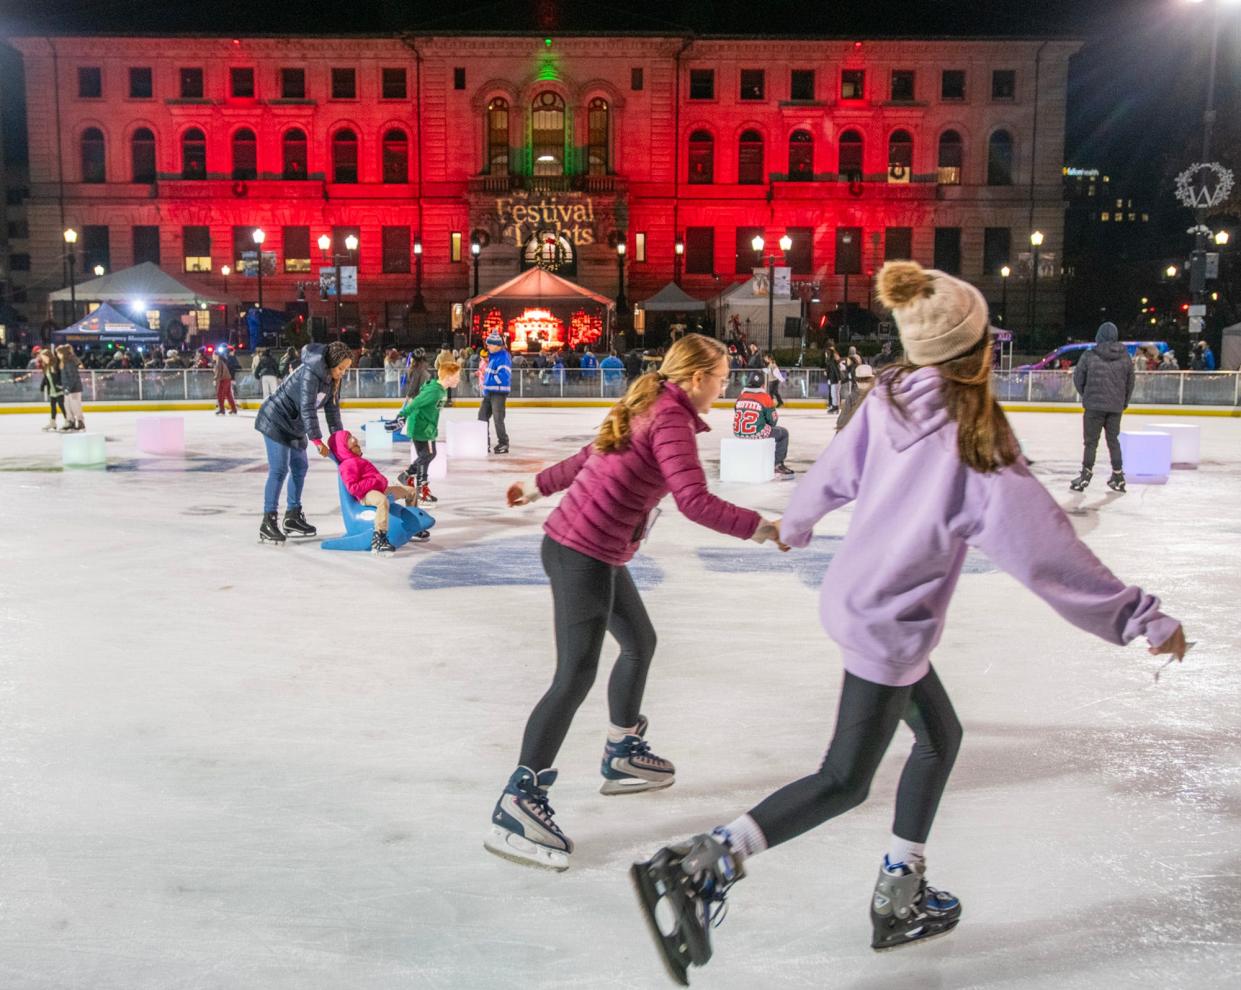 The skating oval was a popular destination during the annual Festival of Lights on Friday.